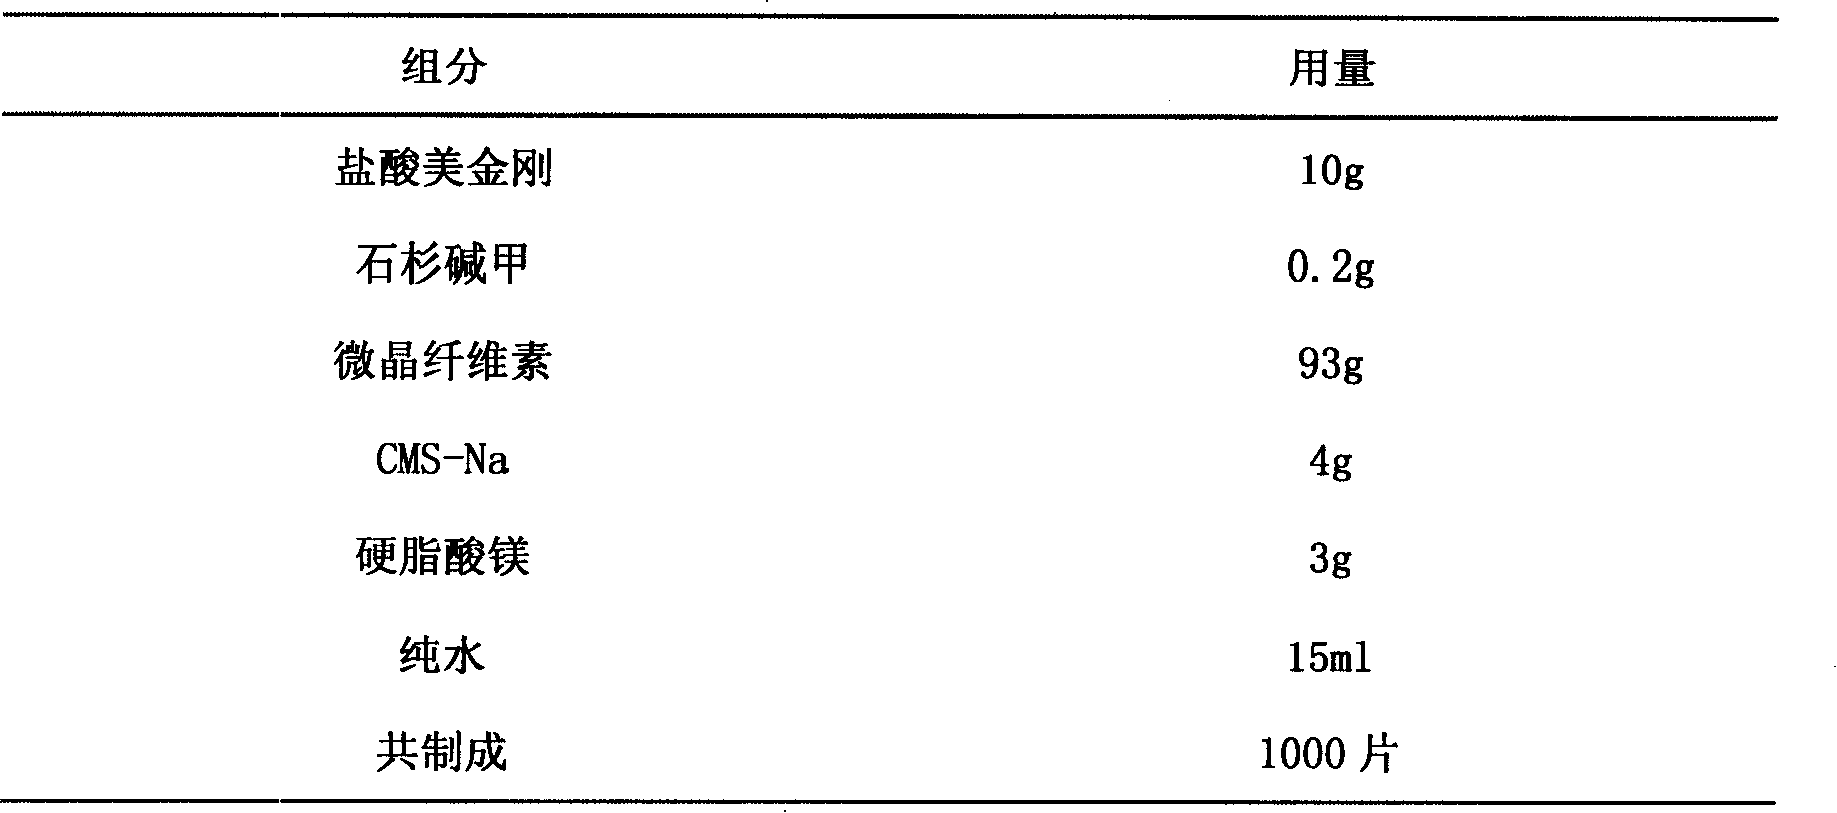 Pharmaceutical composition containing memantine hydrochloride and huperzine A and preparation thereof